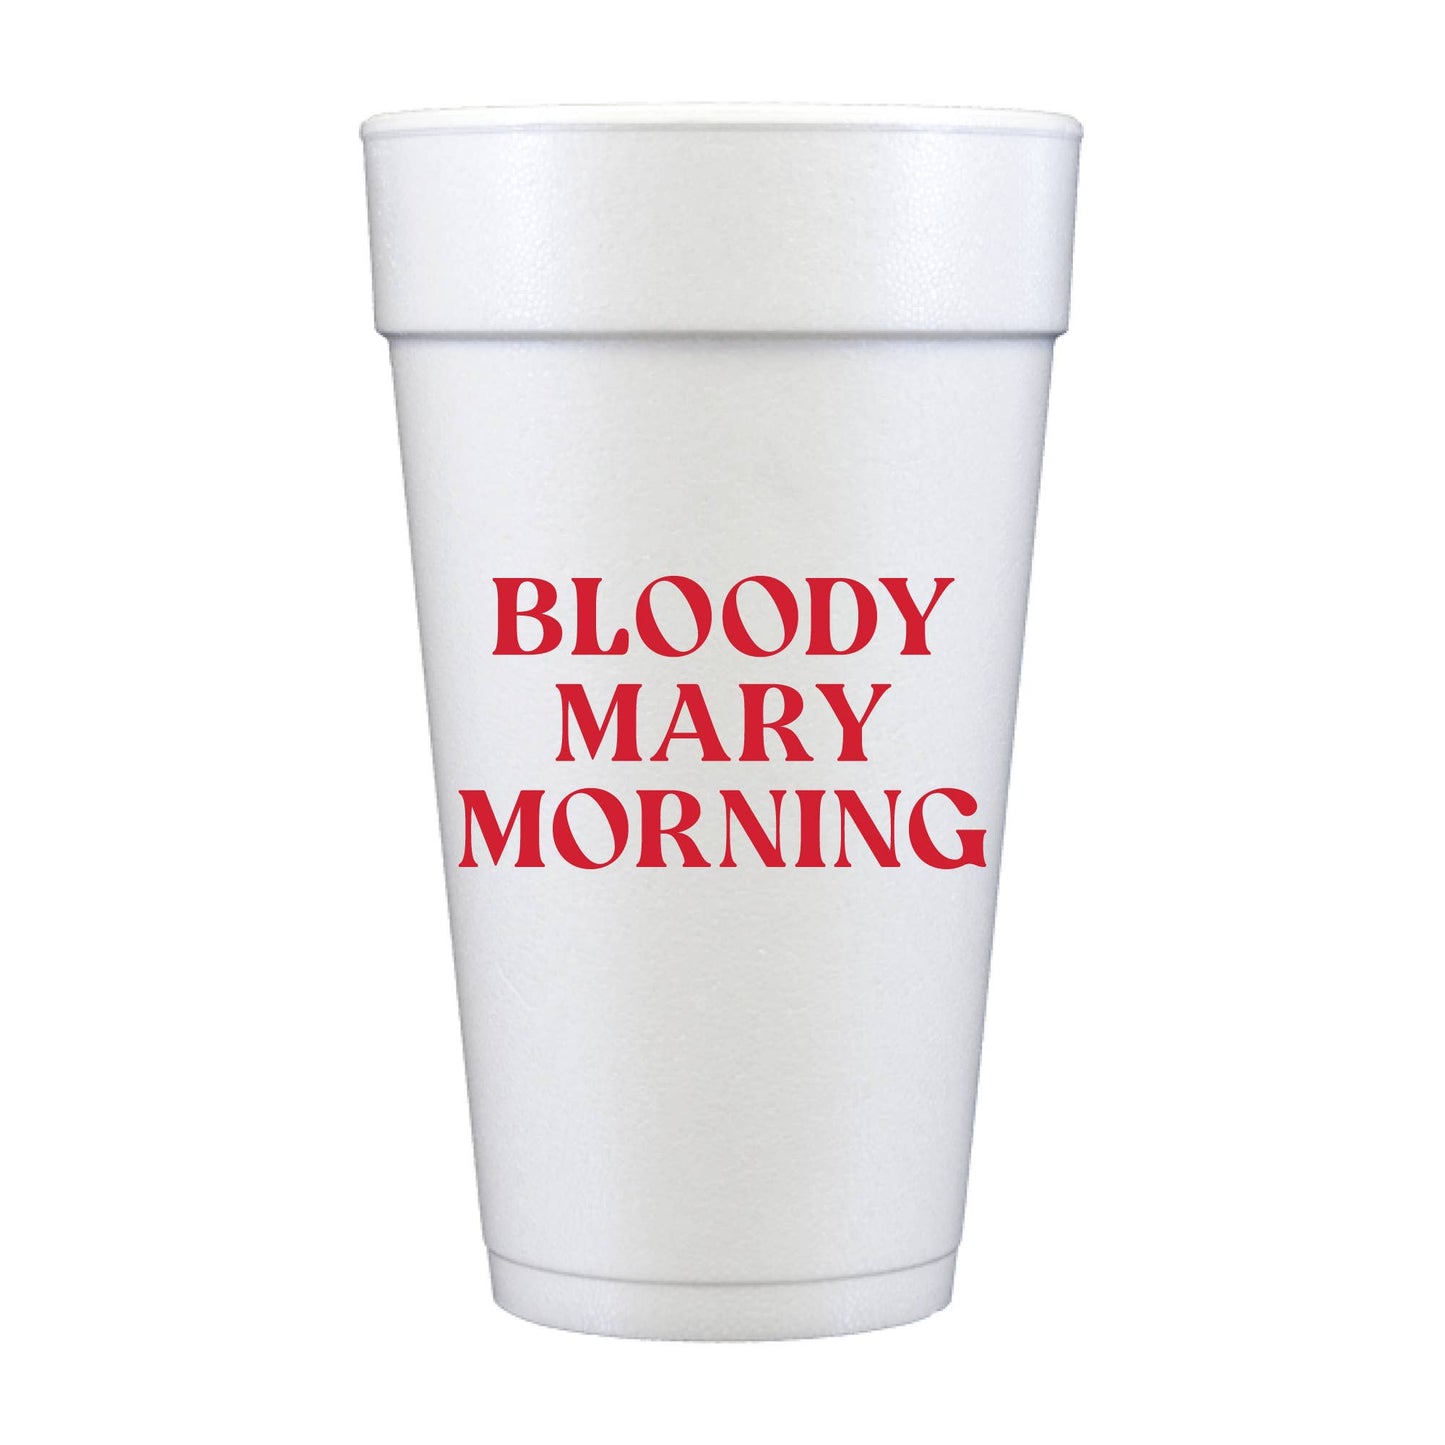 Bloody Mary Morning Tailgate Foam Cups - Sports